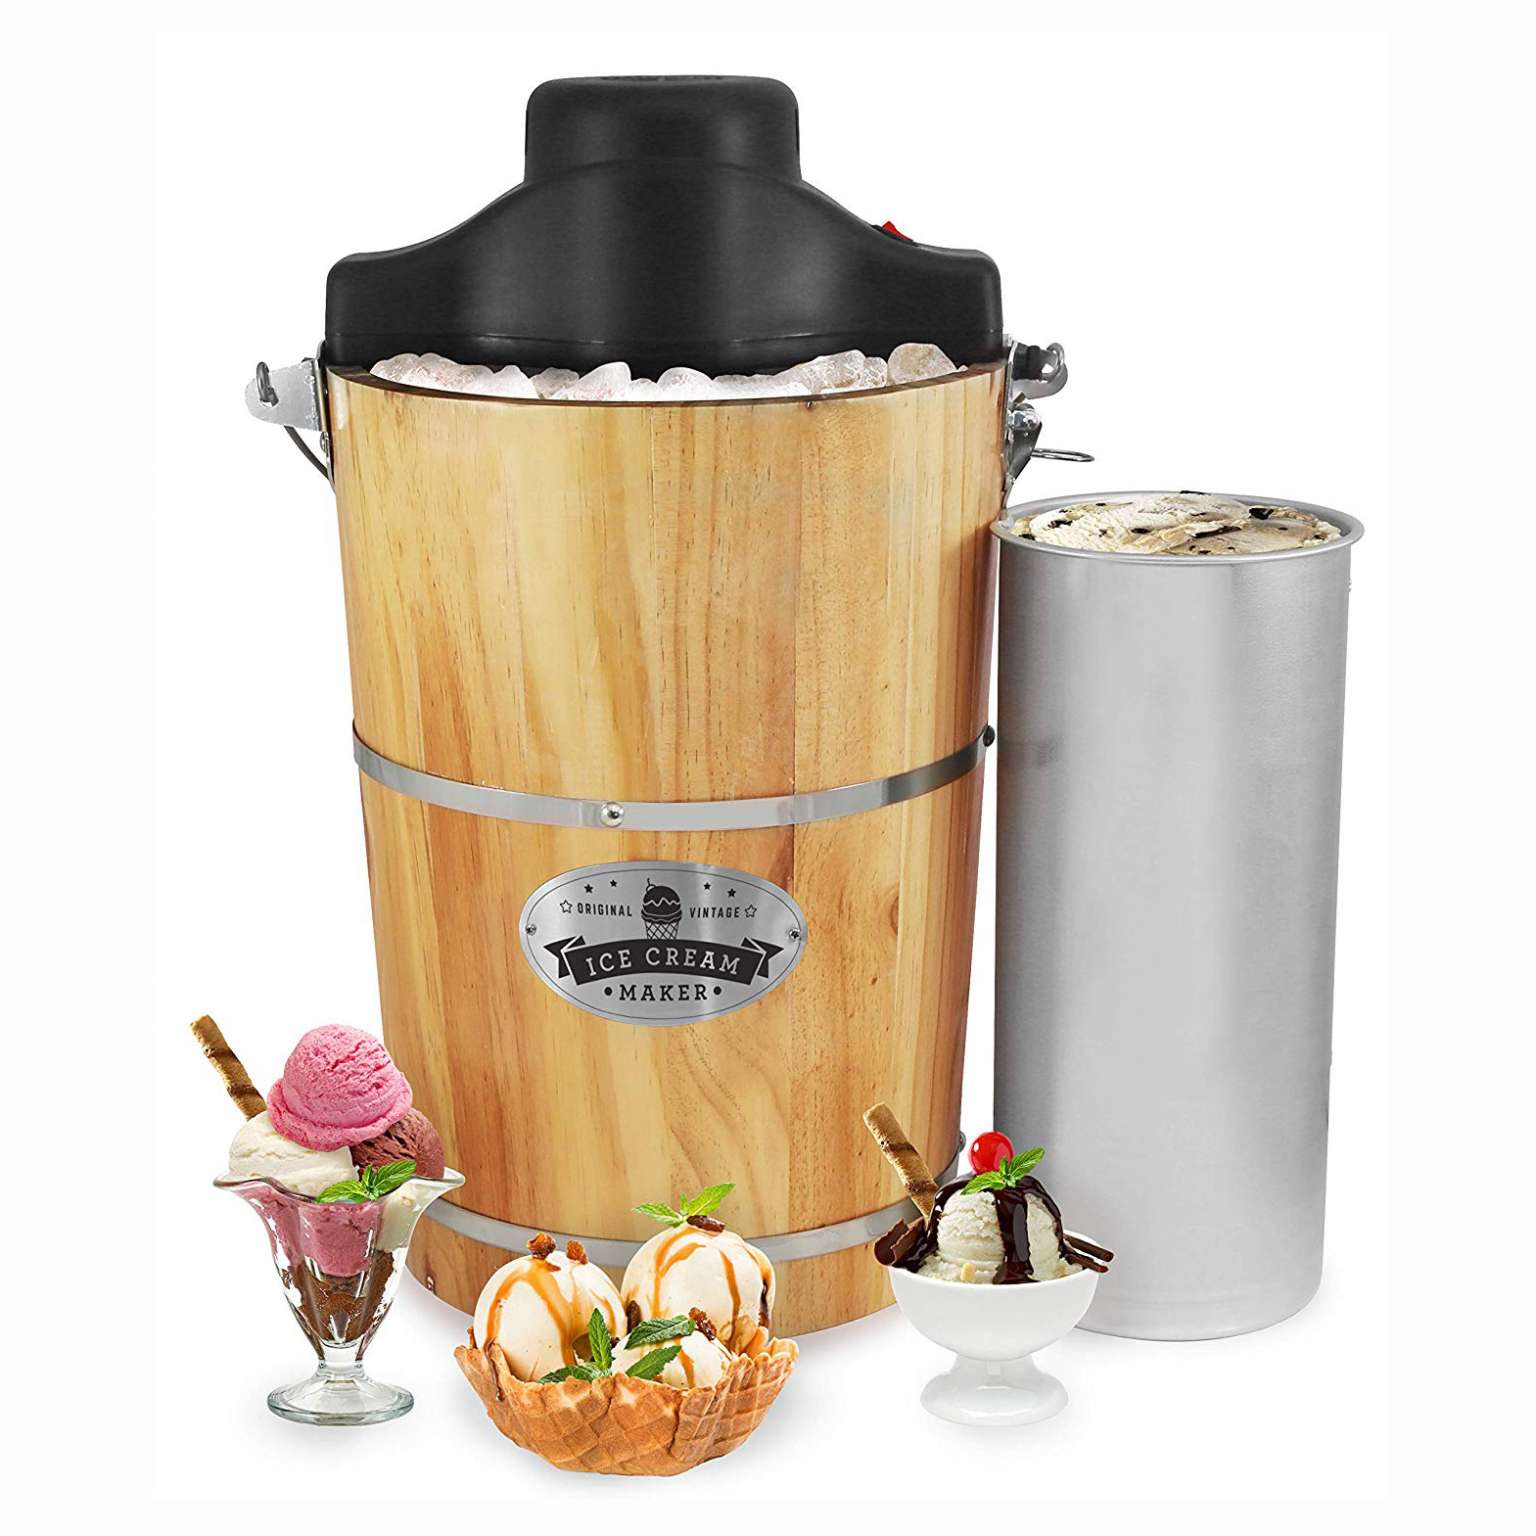 Top 10 Best Electric Bucket Ice Cream Makers in 2021 Reviews